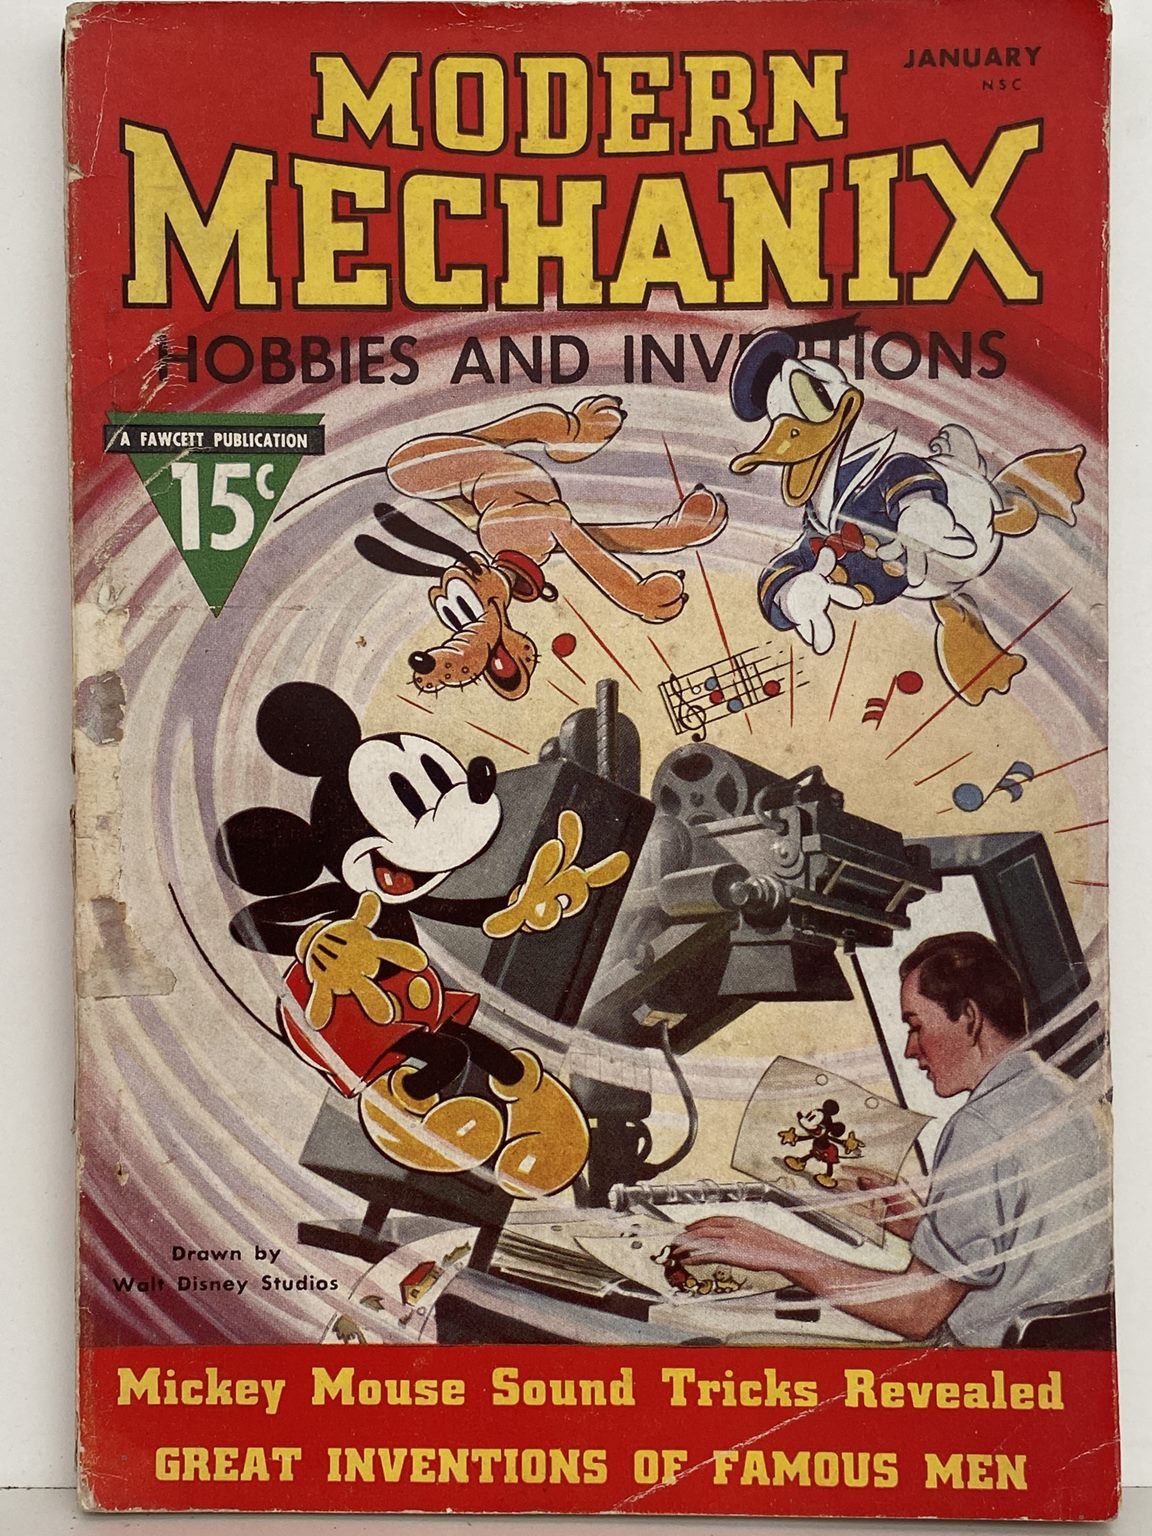 VINTAGE MAGAZINE: Modern Mechanix and Inventions - Vol 17, No. 3 - January 1937